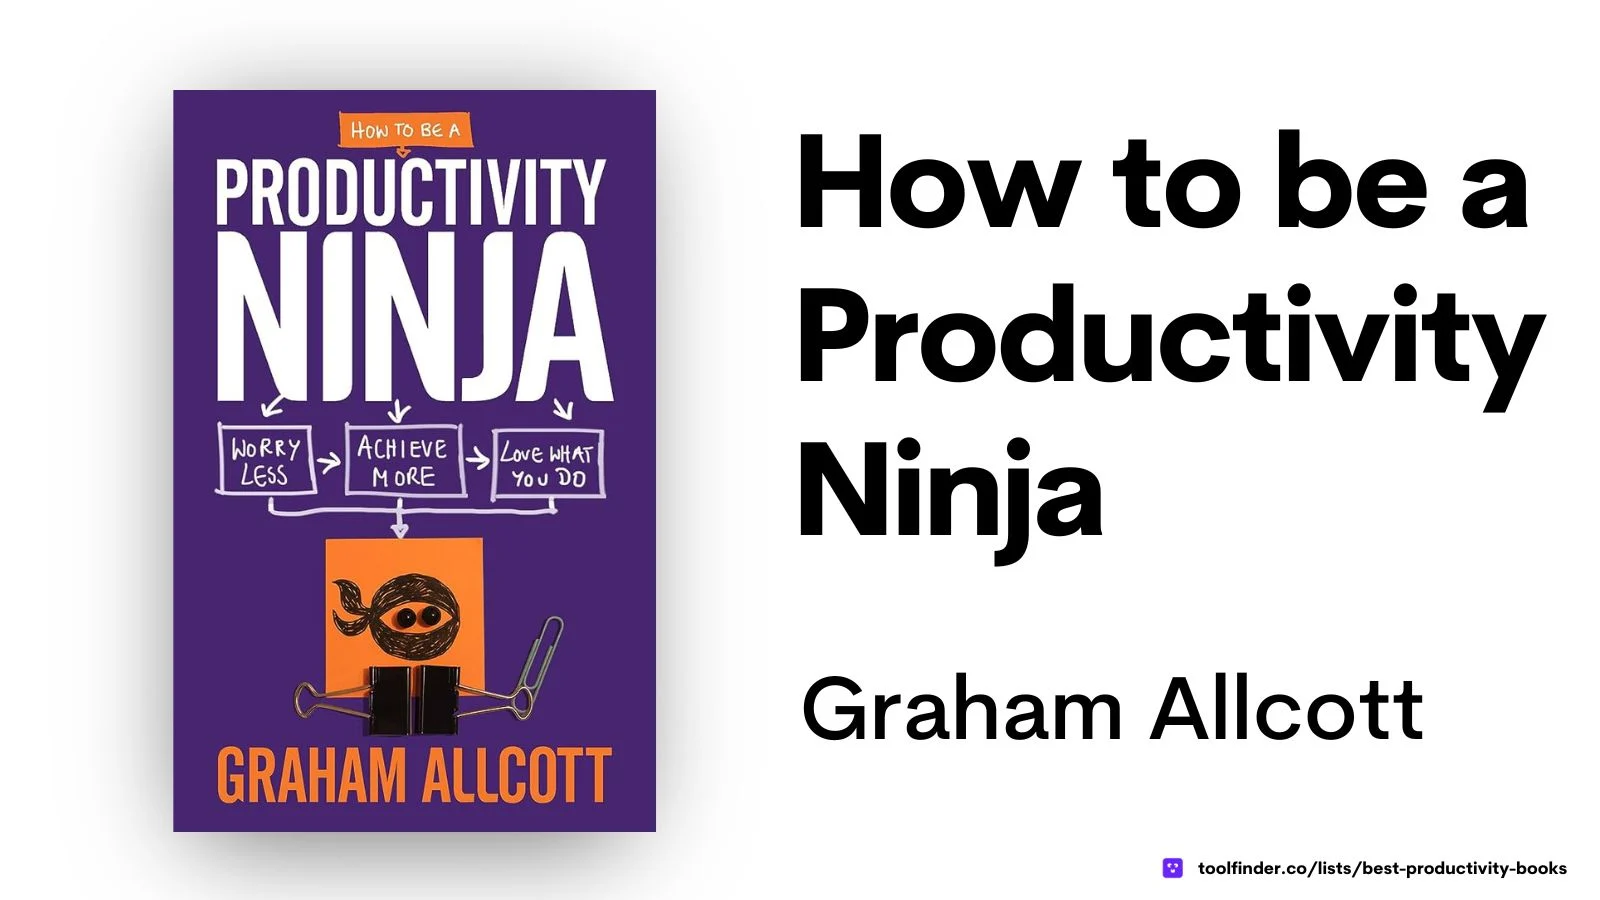 How to be a Productivity Ninja by Graham Allcott is all about being more mindful and managing your tasks better.